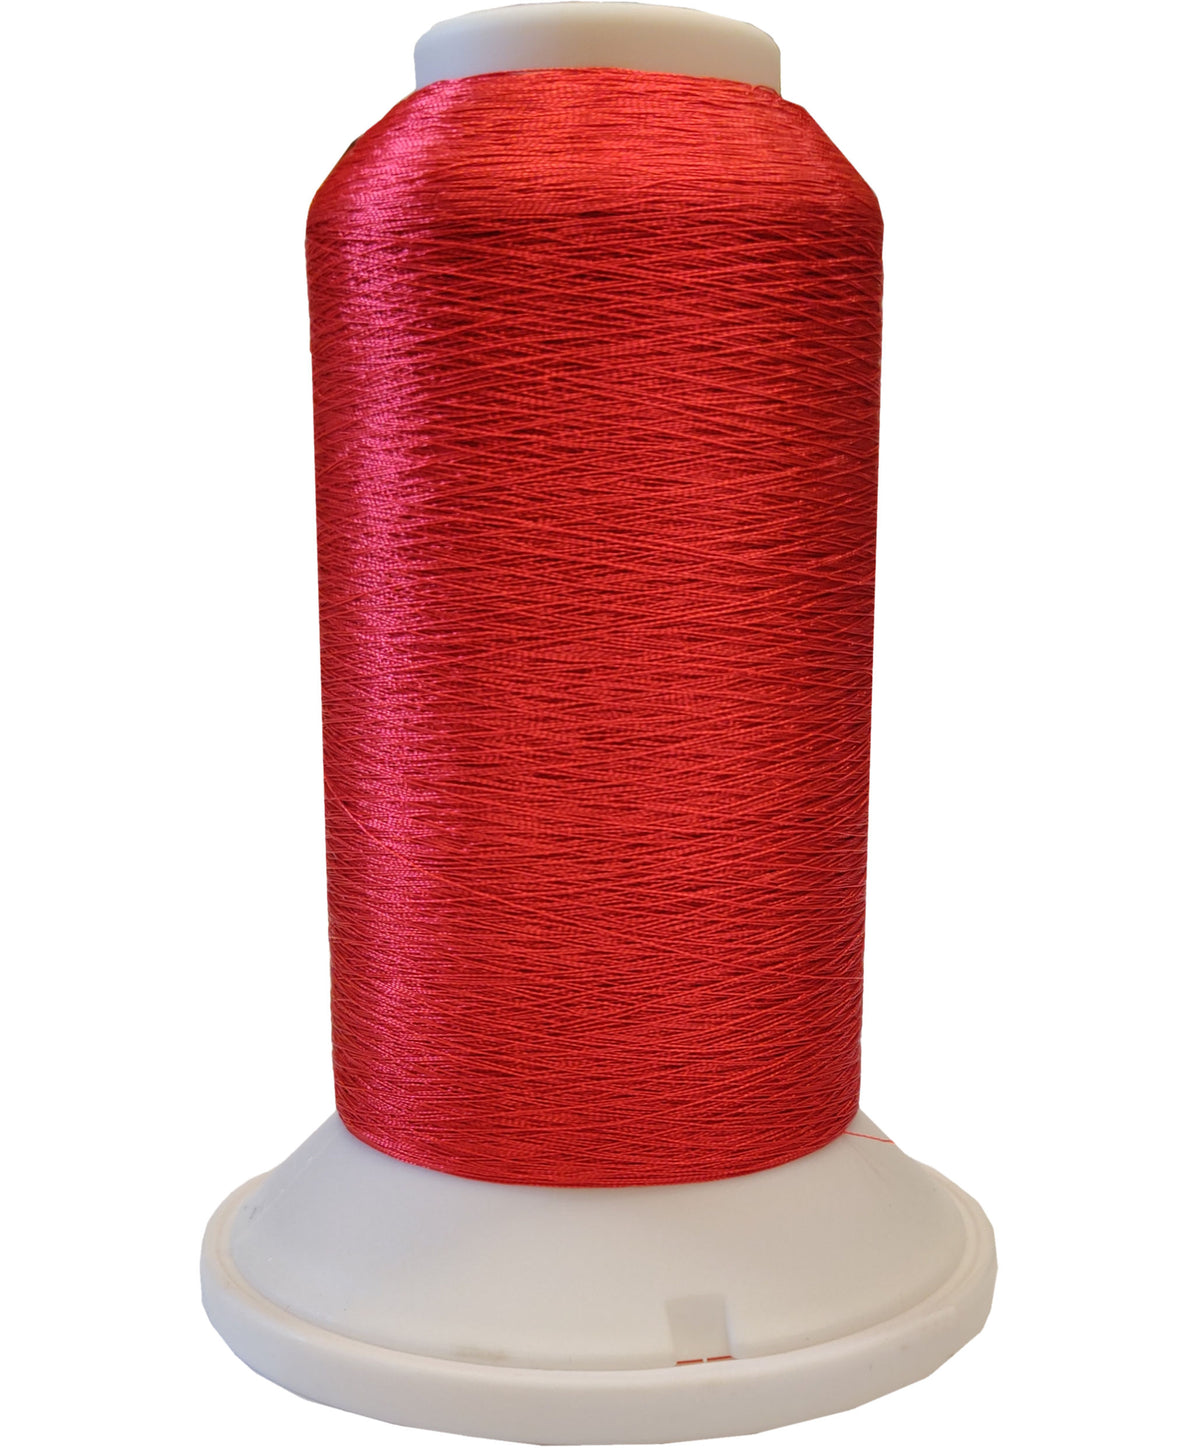 Madeira Polyester CR Metallic #40 Embroidery Thread 2,734 yds - Color 4288